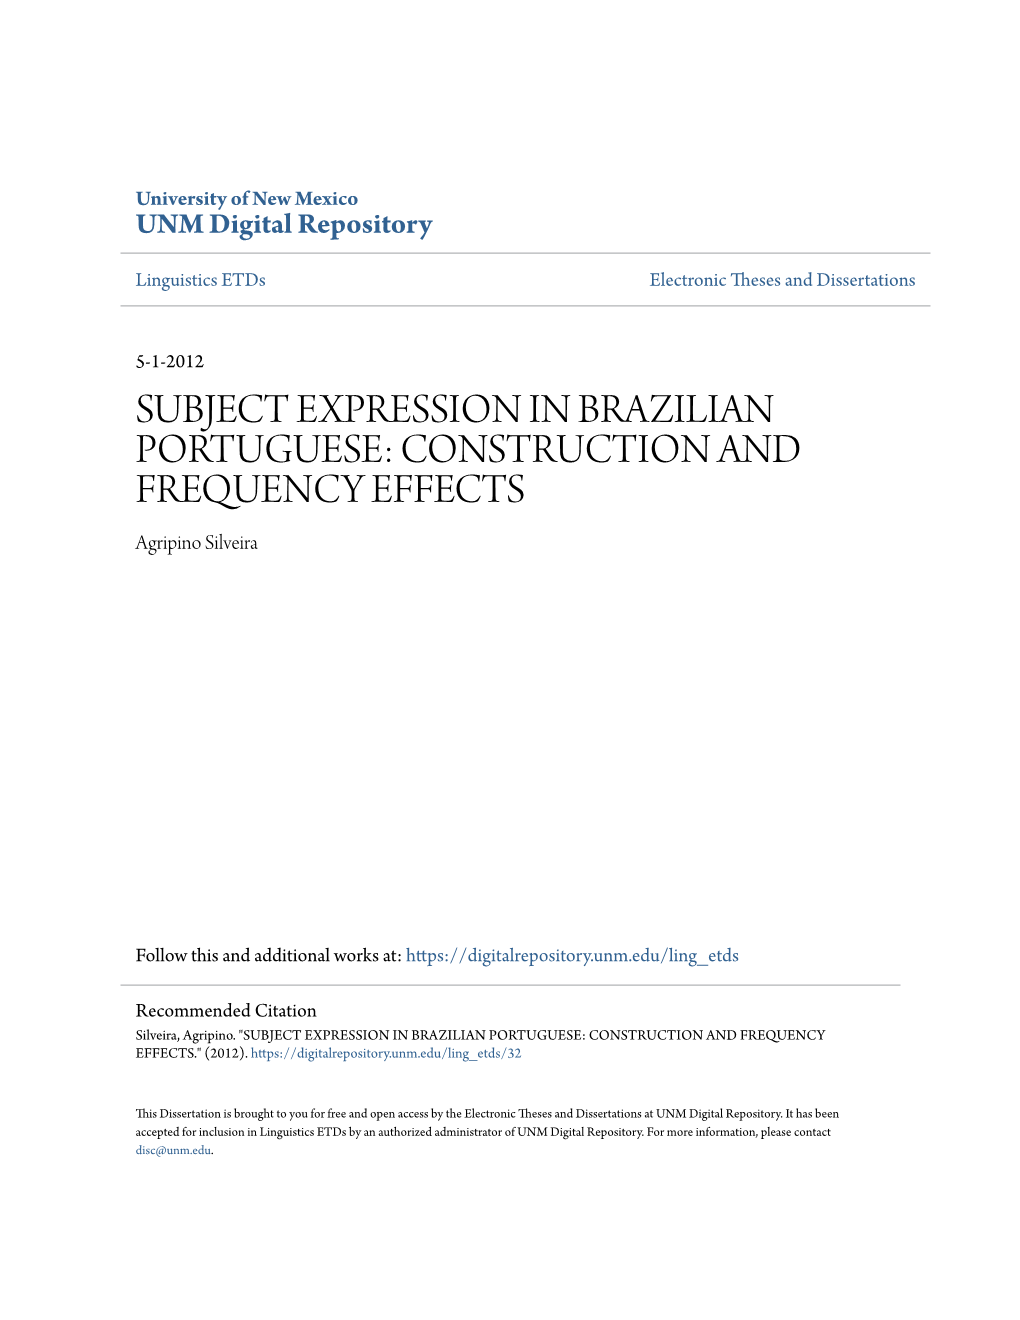 SUBJECT EXPRESSION in BRAZILIAN PORTUGUESE: CONSTRUCTION and FREQUENCY EFFECTS Agripino Silveira